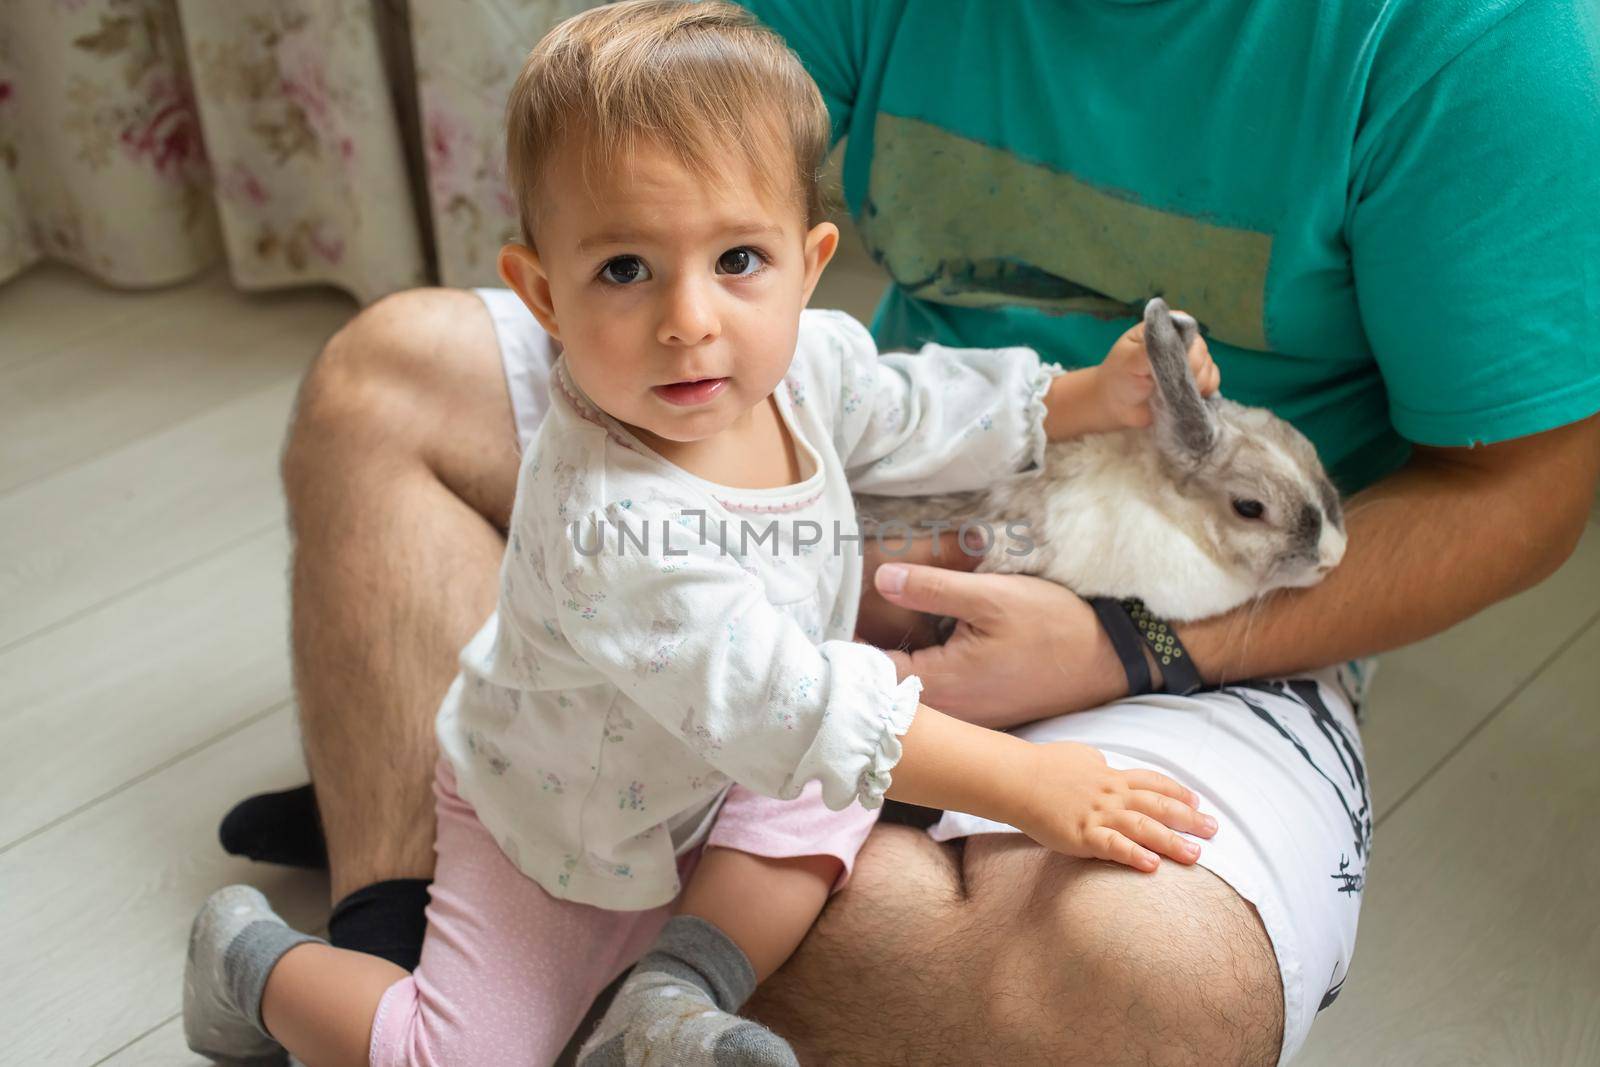 adorable baby sits in dad's arms and strokes a decorative rabbit. father shows little child easter bunny. domestic animals in a family with children